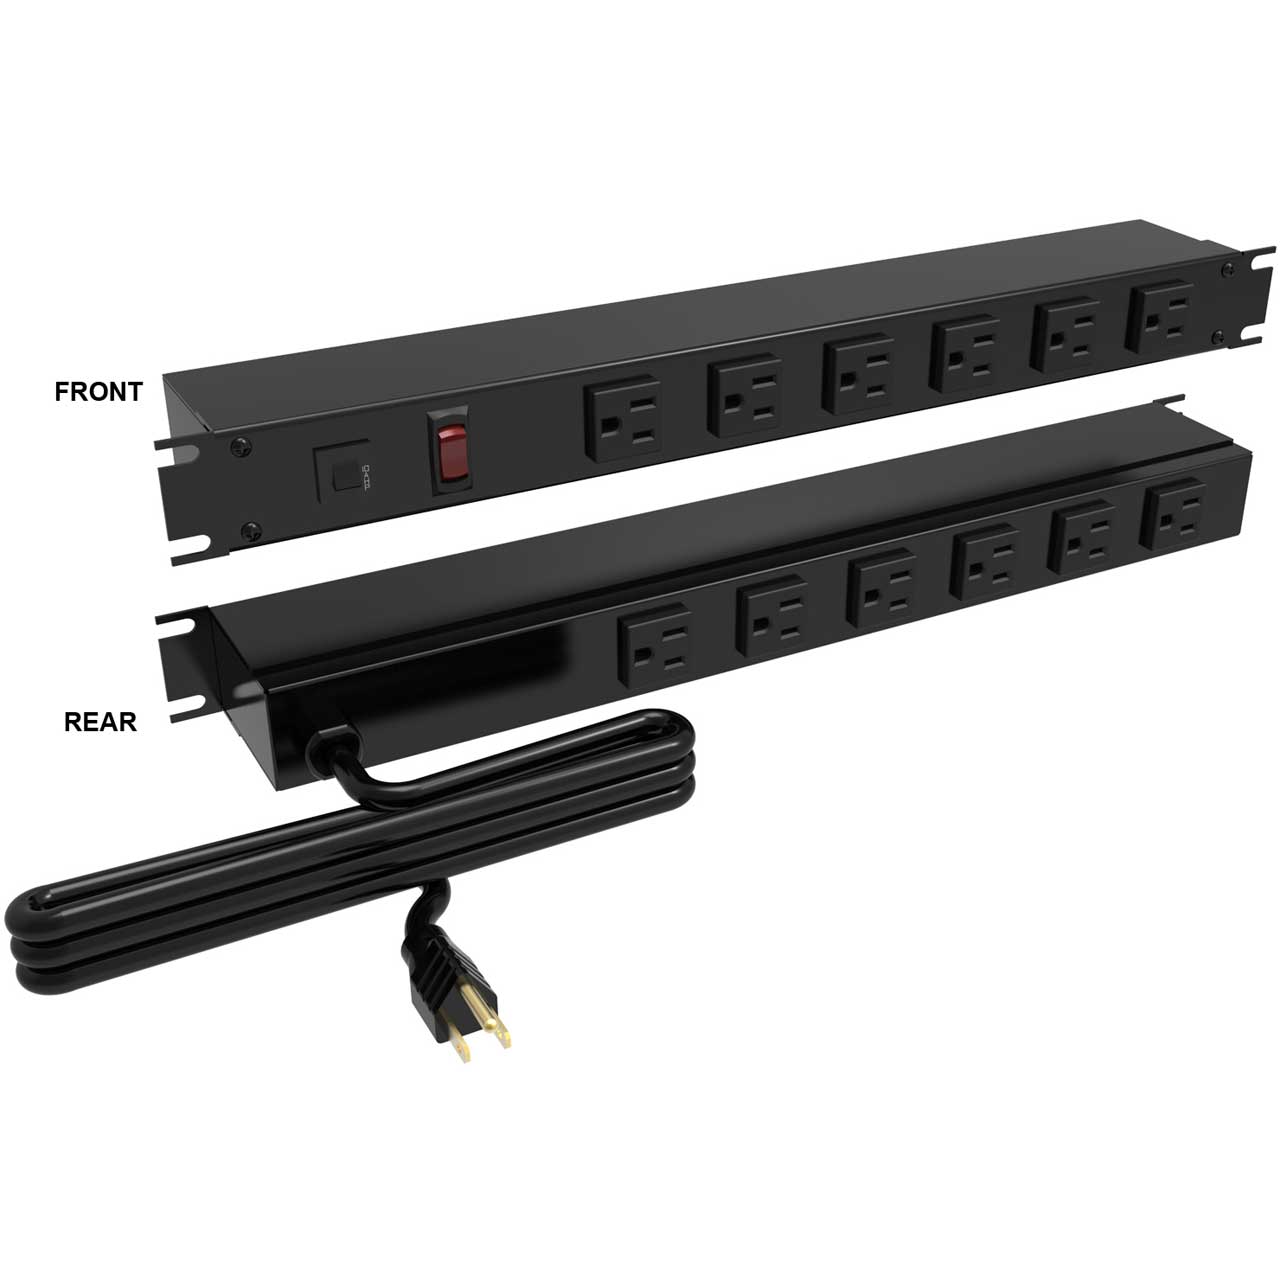 Hammond 1583T12A1BKX 19-inch Rack Mount Outlet Strip - 15A - 12 Outlets and 6 Foot Cord - Black 1583T12A1BKX